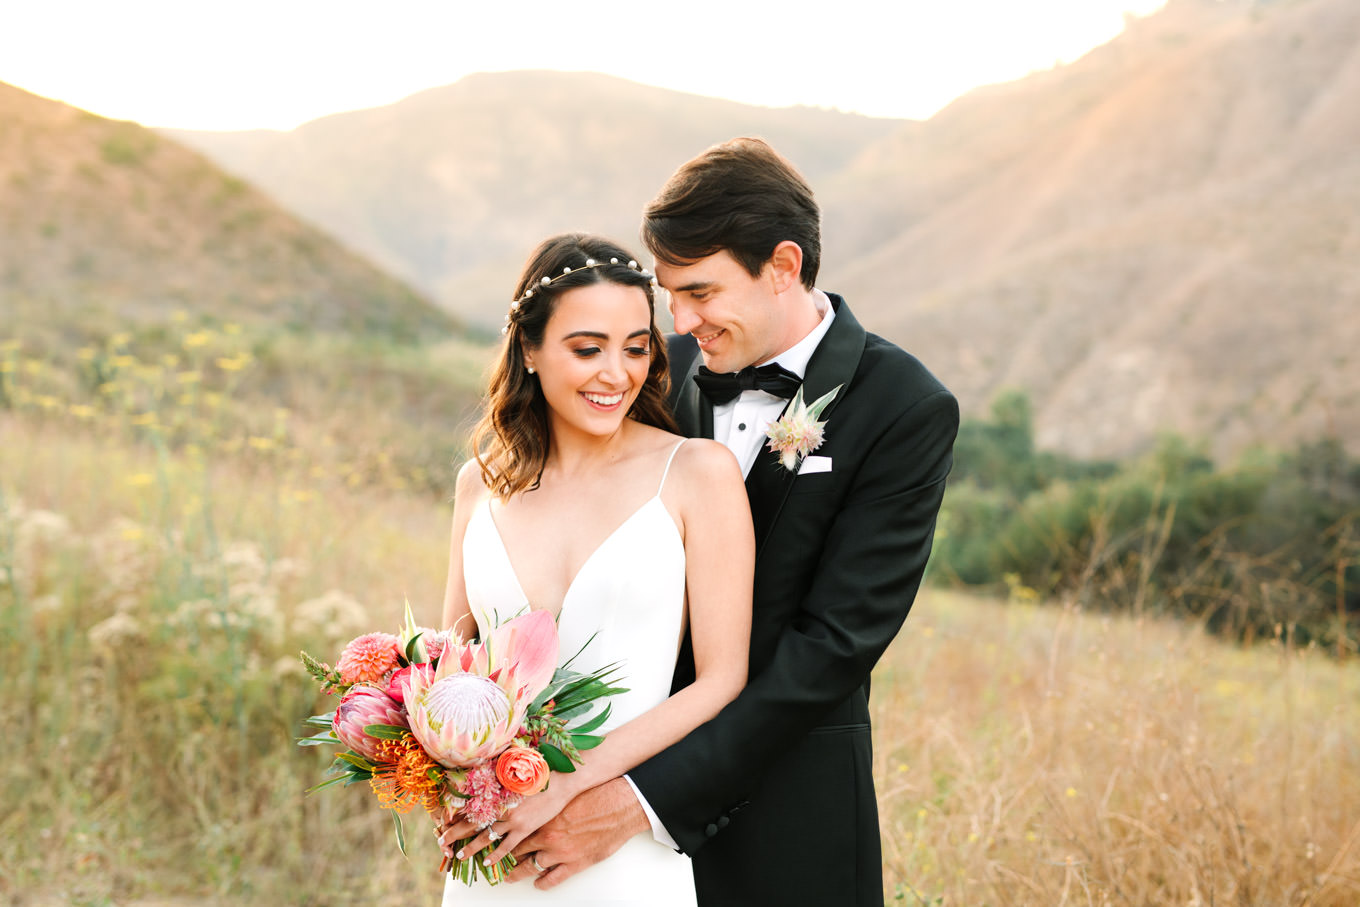 Wedding portrait in Malibu Canyon mountains | Engagement, elopement, and wedding photography roundup of Mary Costa’s favorite images from 2020 | Colorful and elevated photography for fun-loving couples in Southern California | #2020wedding #elopement #weddingphoto #weddingphotography   Source: Mary Costa Photography | Los Angeles